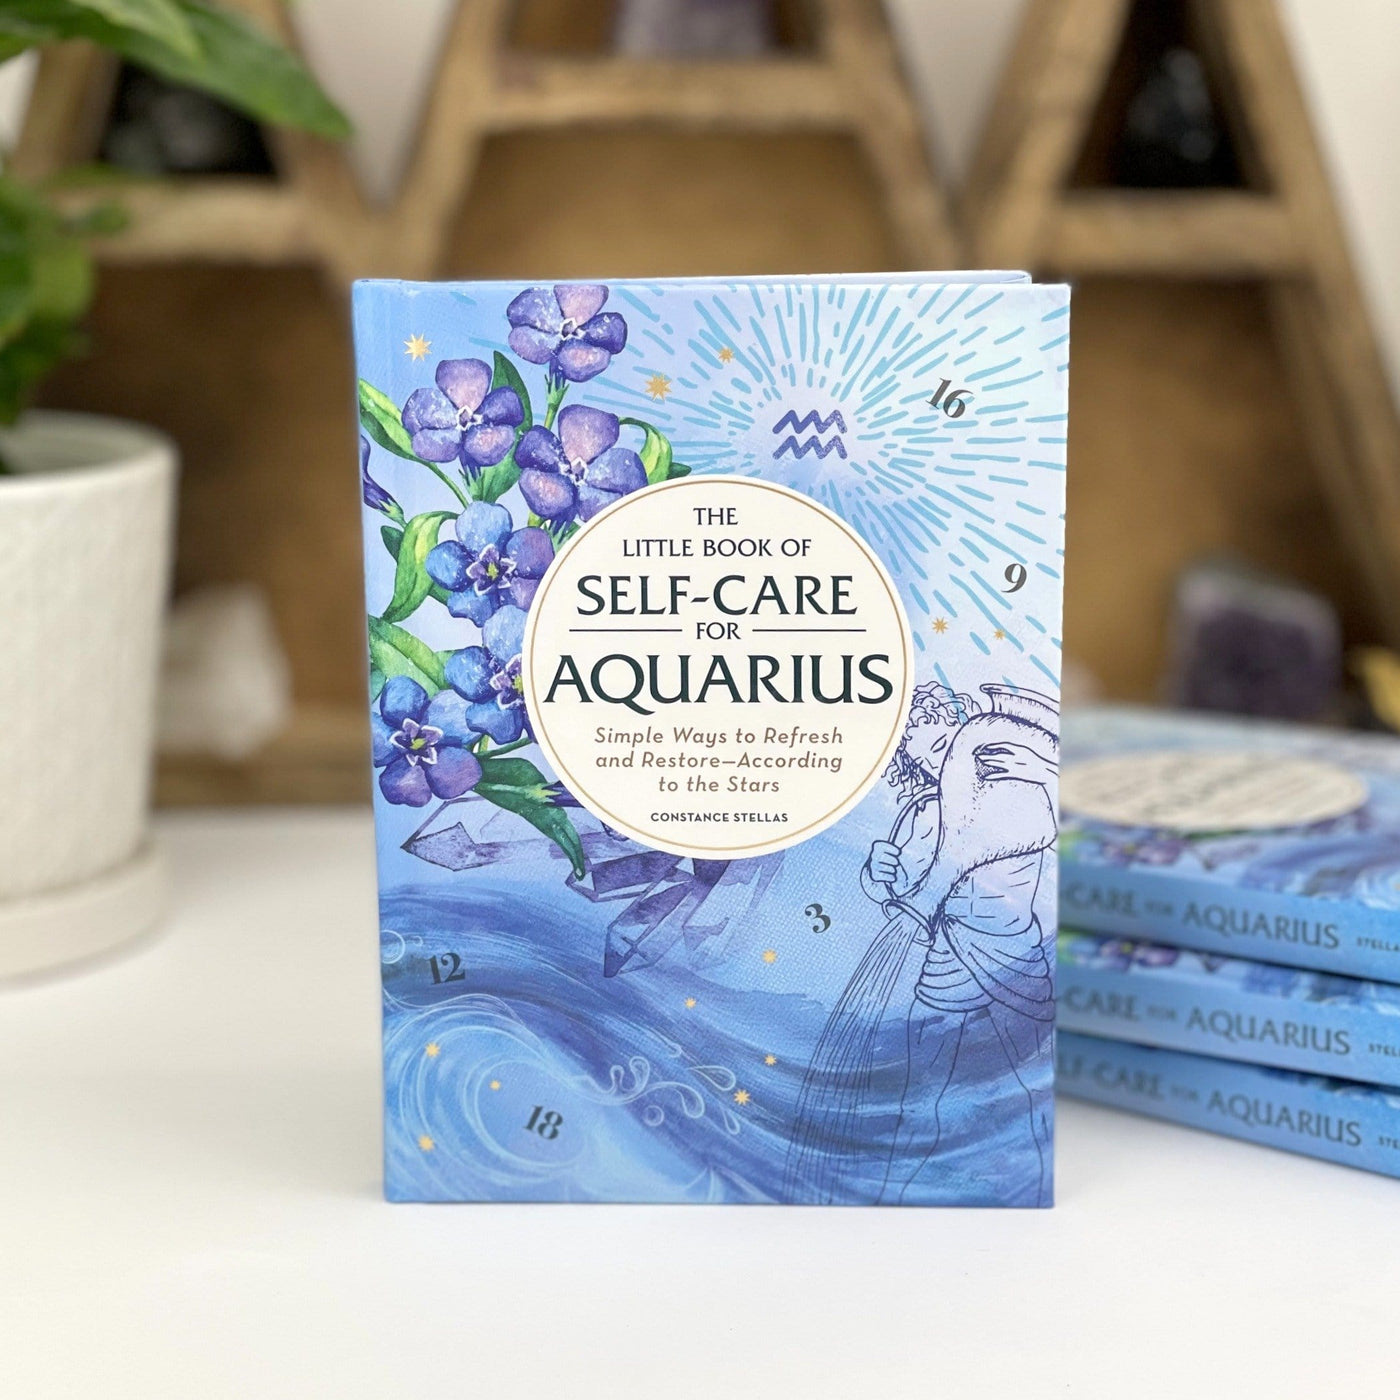 The Little Book of Self-Care for Aquarius in Blue color